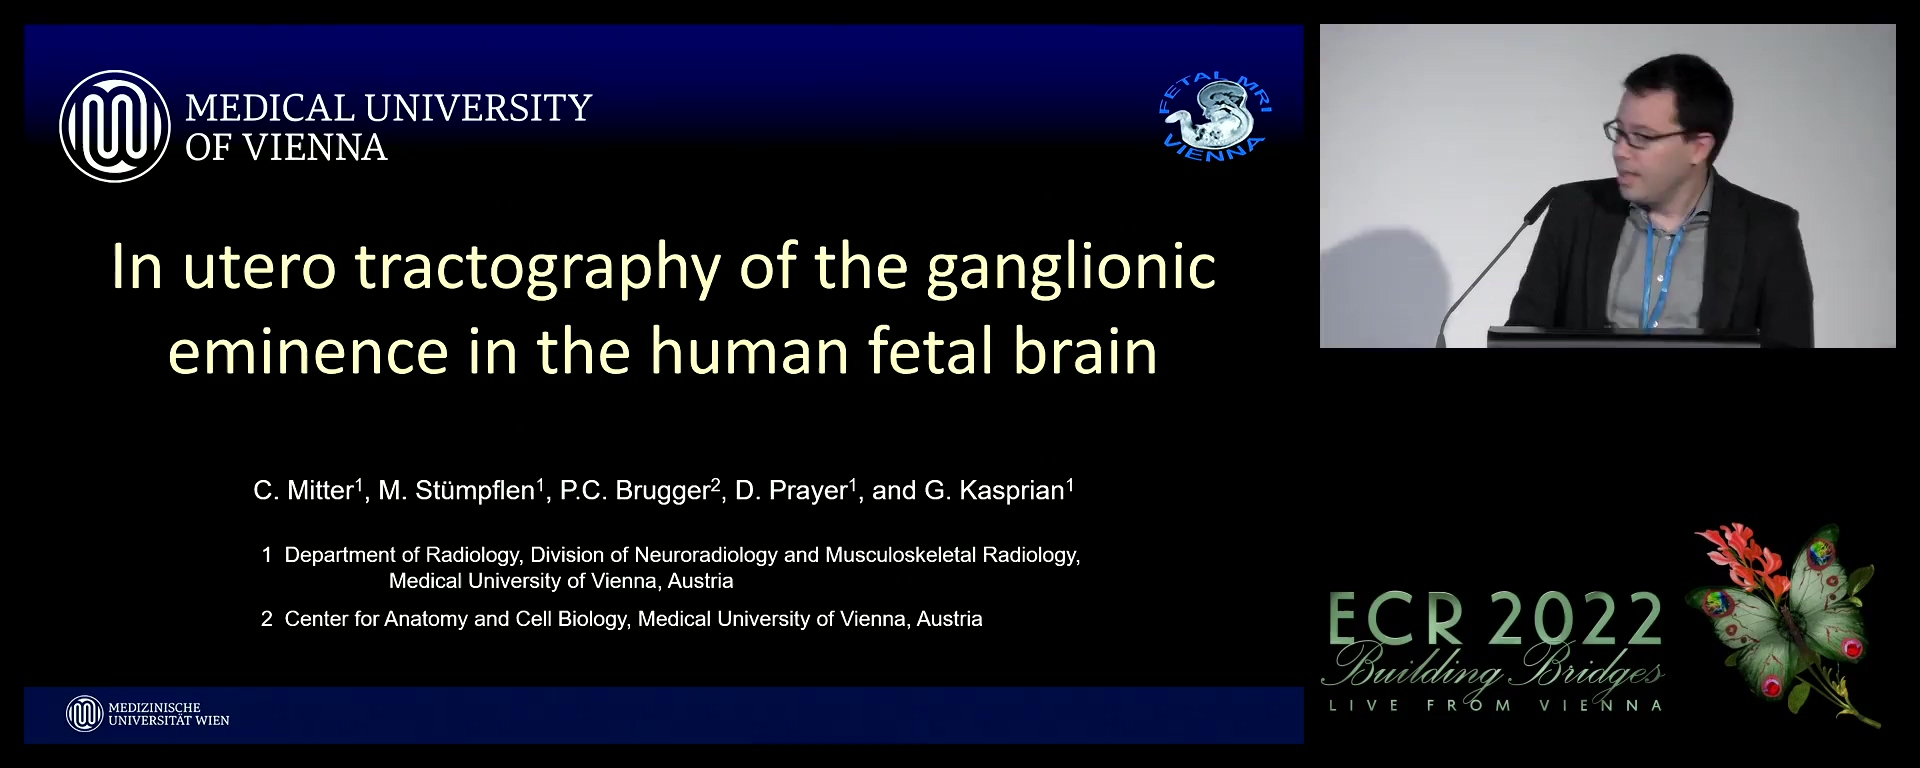 In utero tractography of the ganglionic eminence in the human fetal brain - Christian Mitter, Vienna / AT